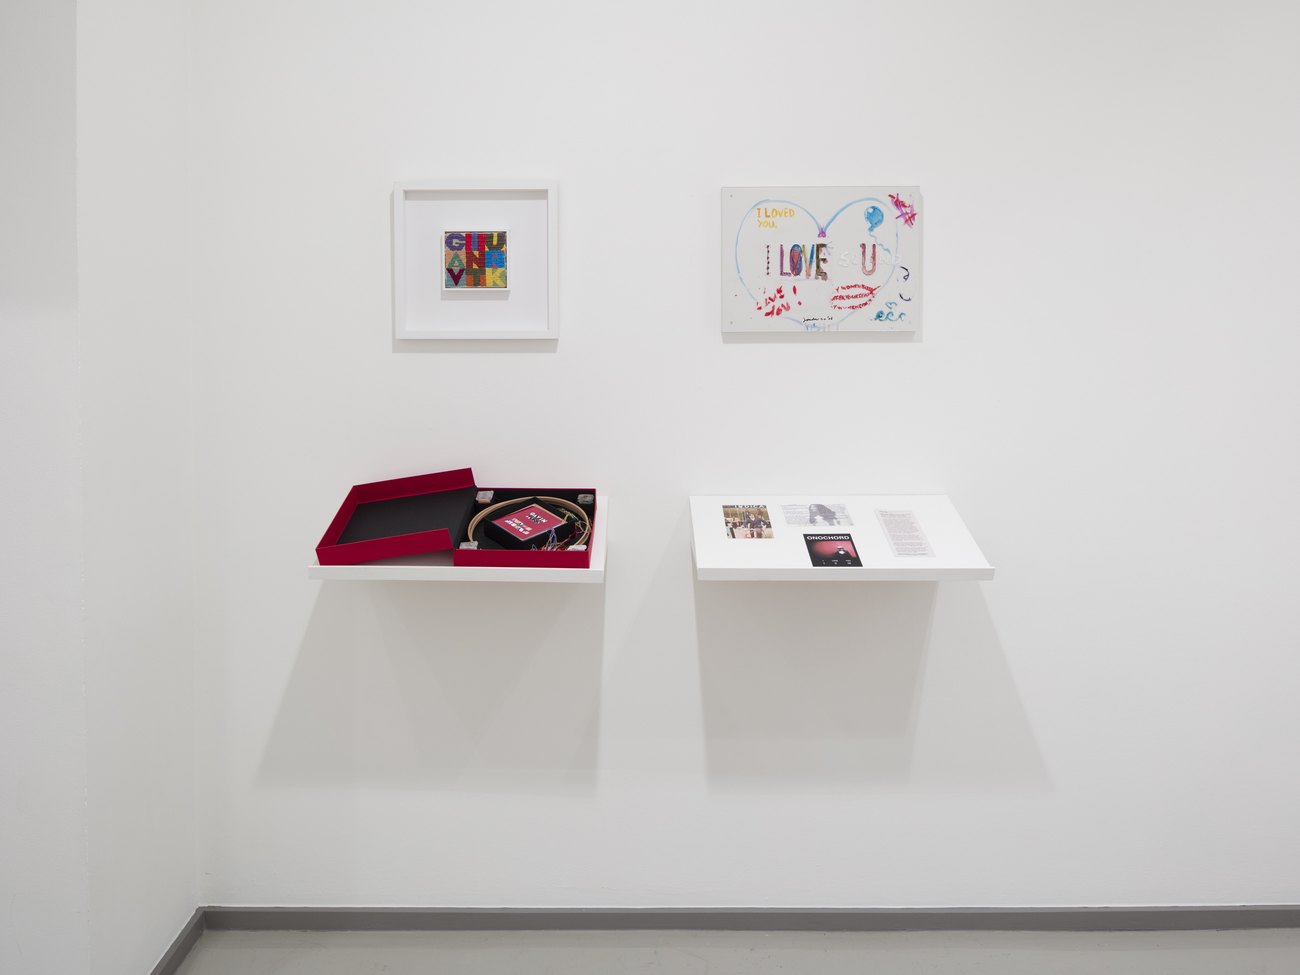 Image shows two artworks one by Gavin Turk, an embroidery 9 panel with Gavin Turk written 